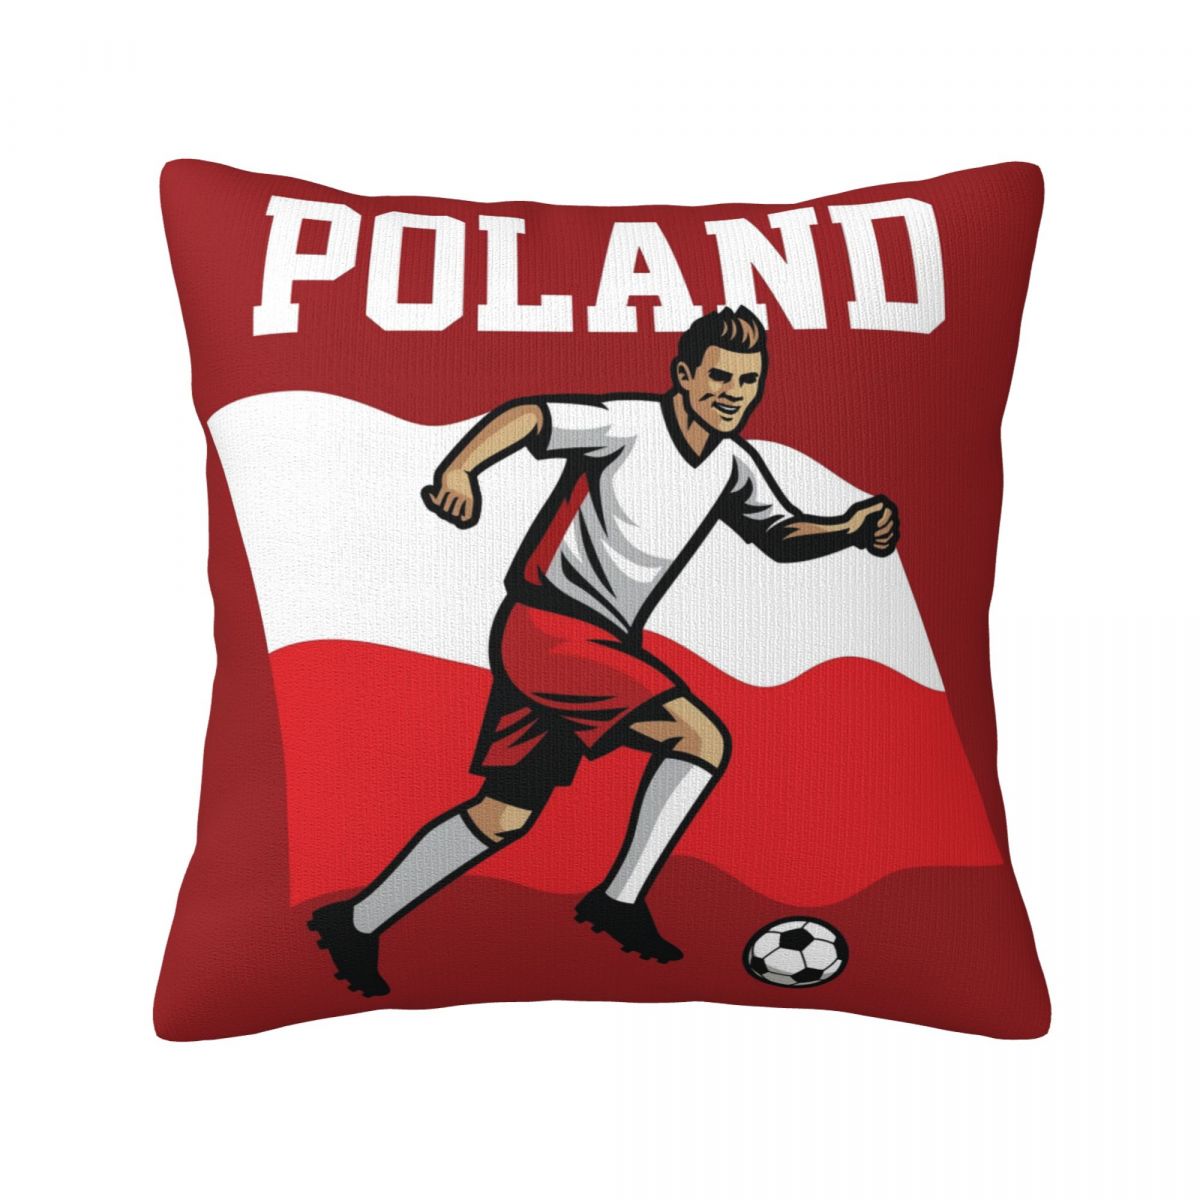 Poland Soccer Player Decorative Square Throw Pillow Covers